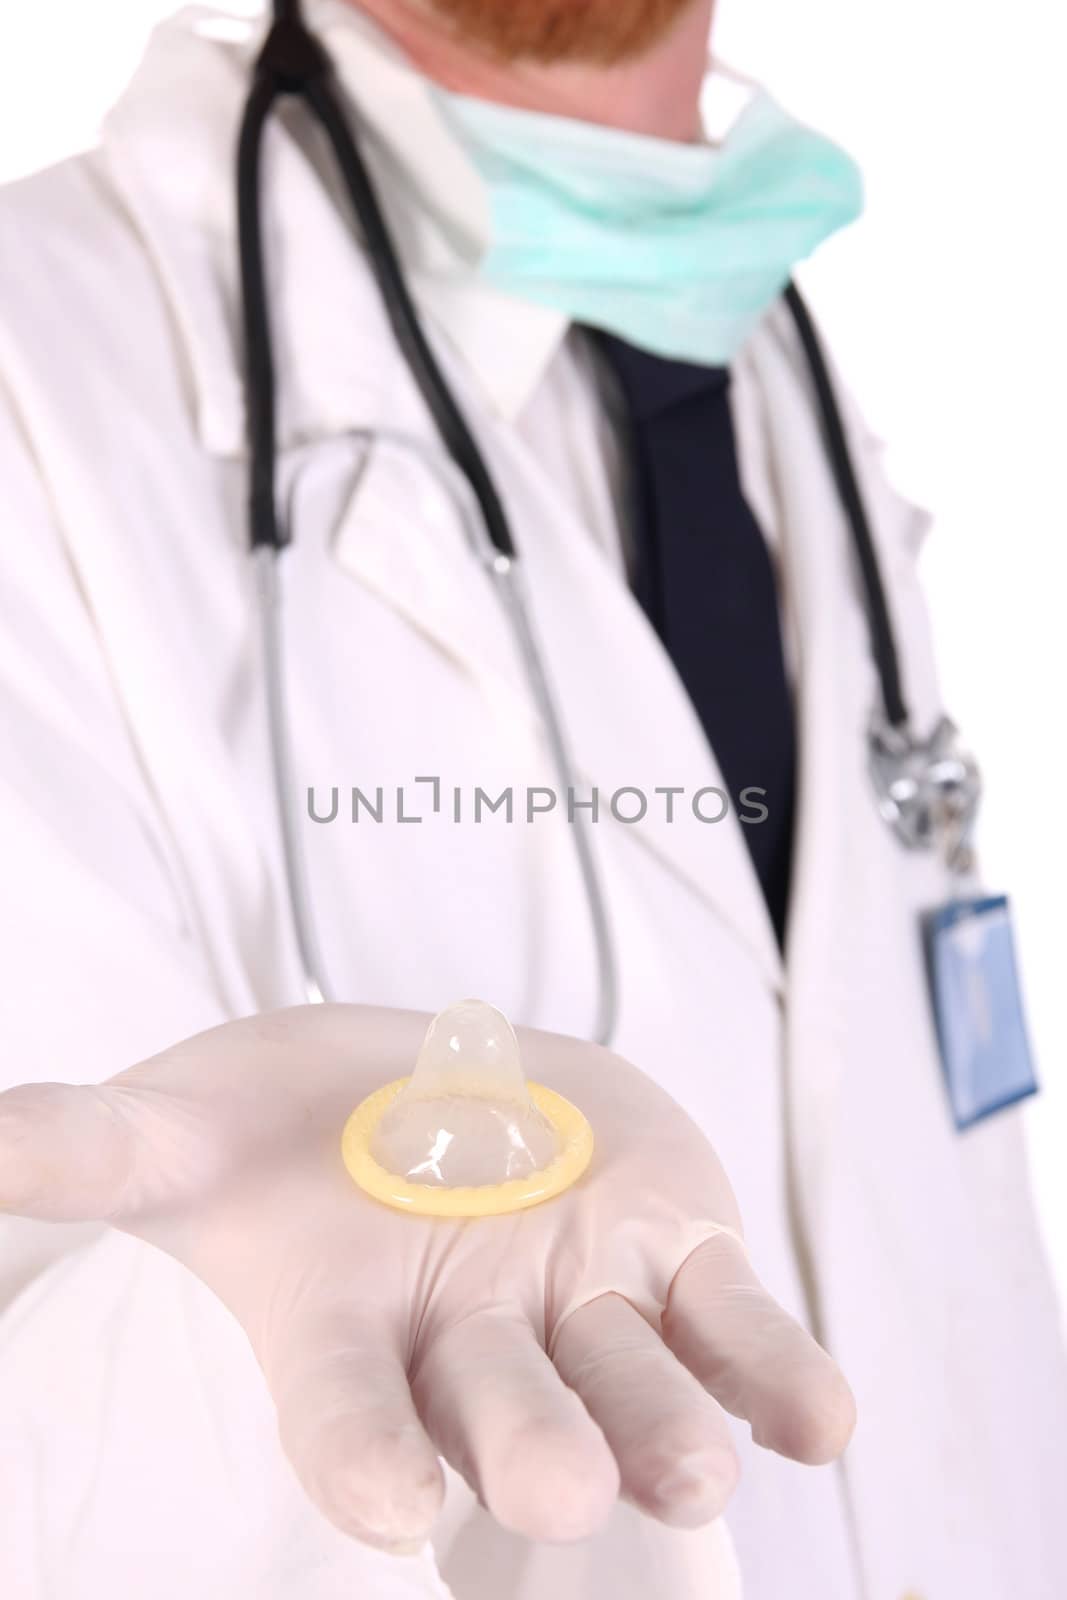 Details an doctor with condom